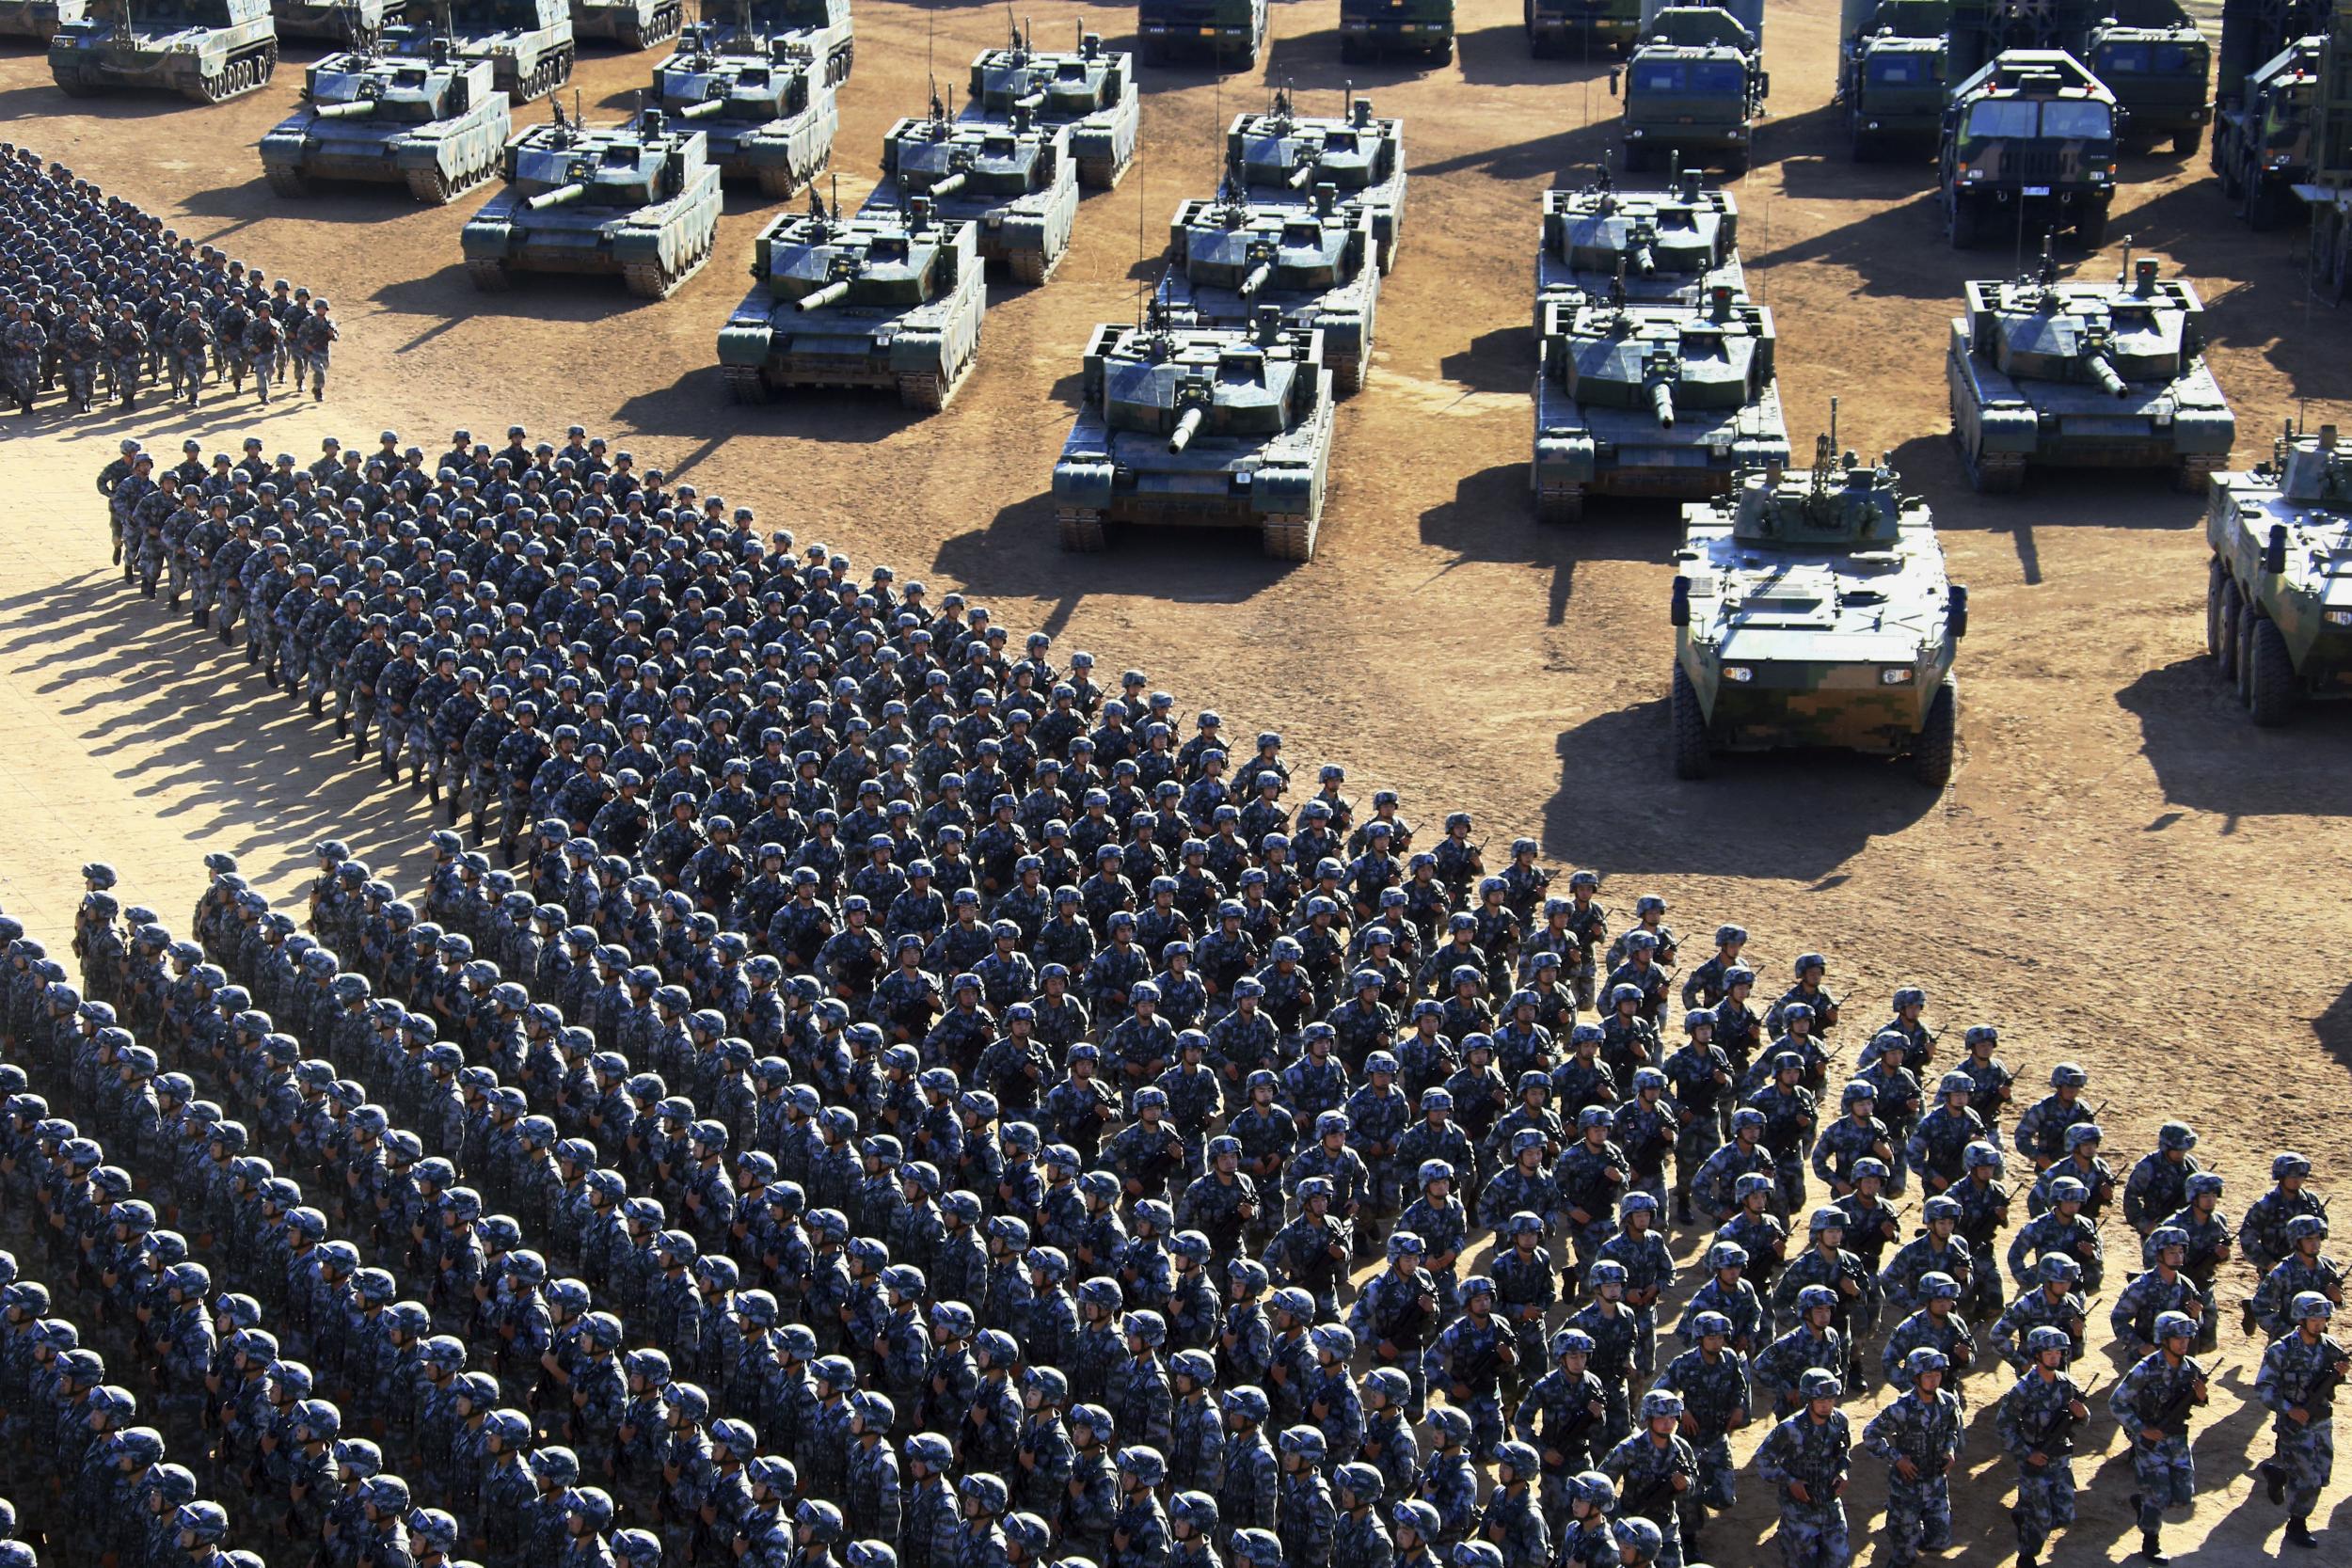 Chinese troops march past military vehicles in a massive show of firepower